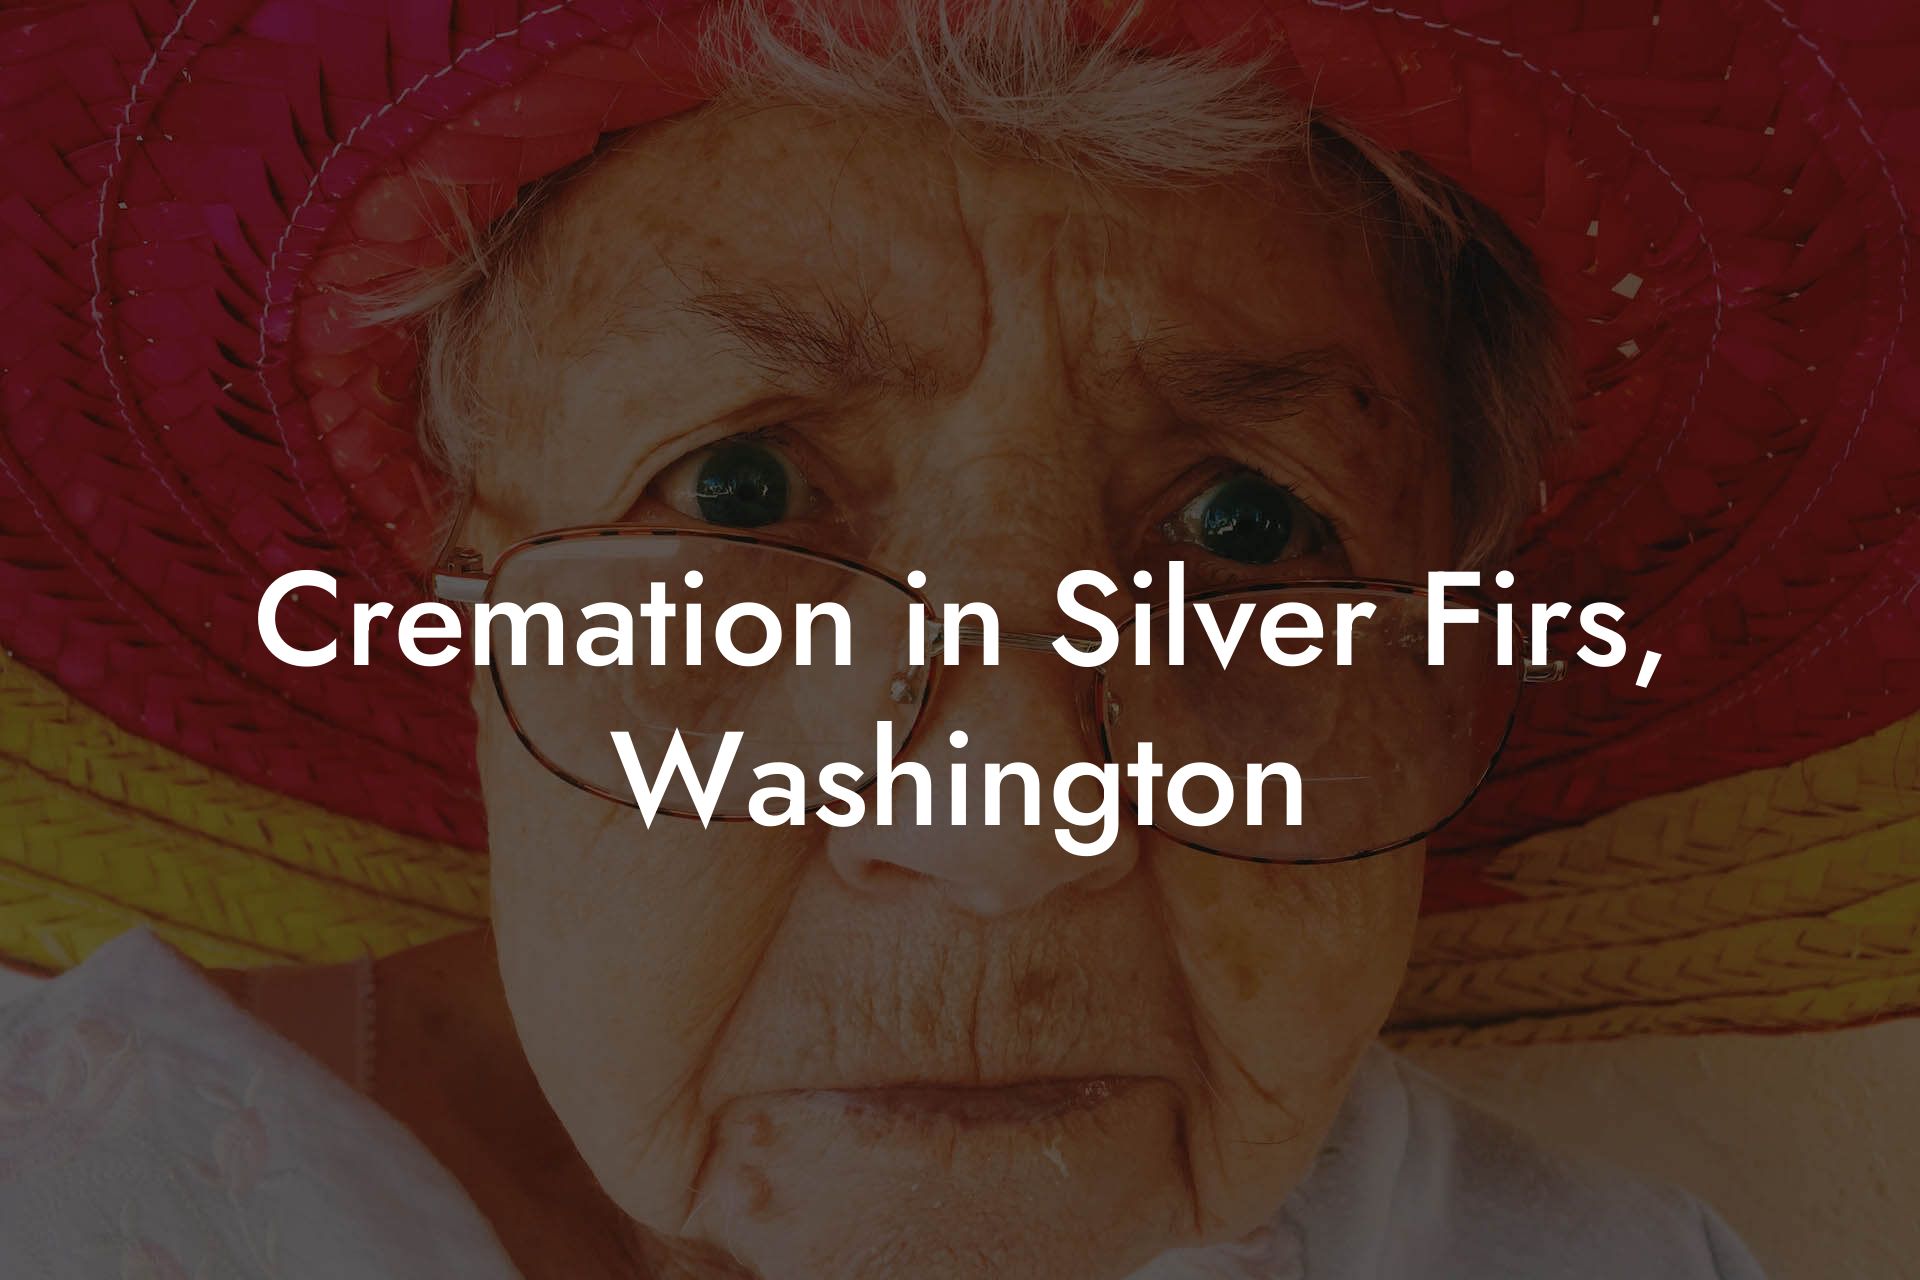 Cremation in Silver Firs, Washington